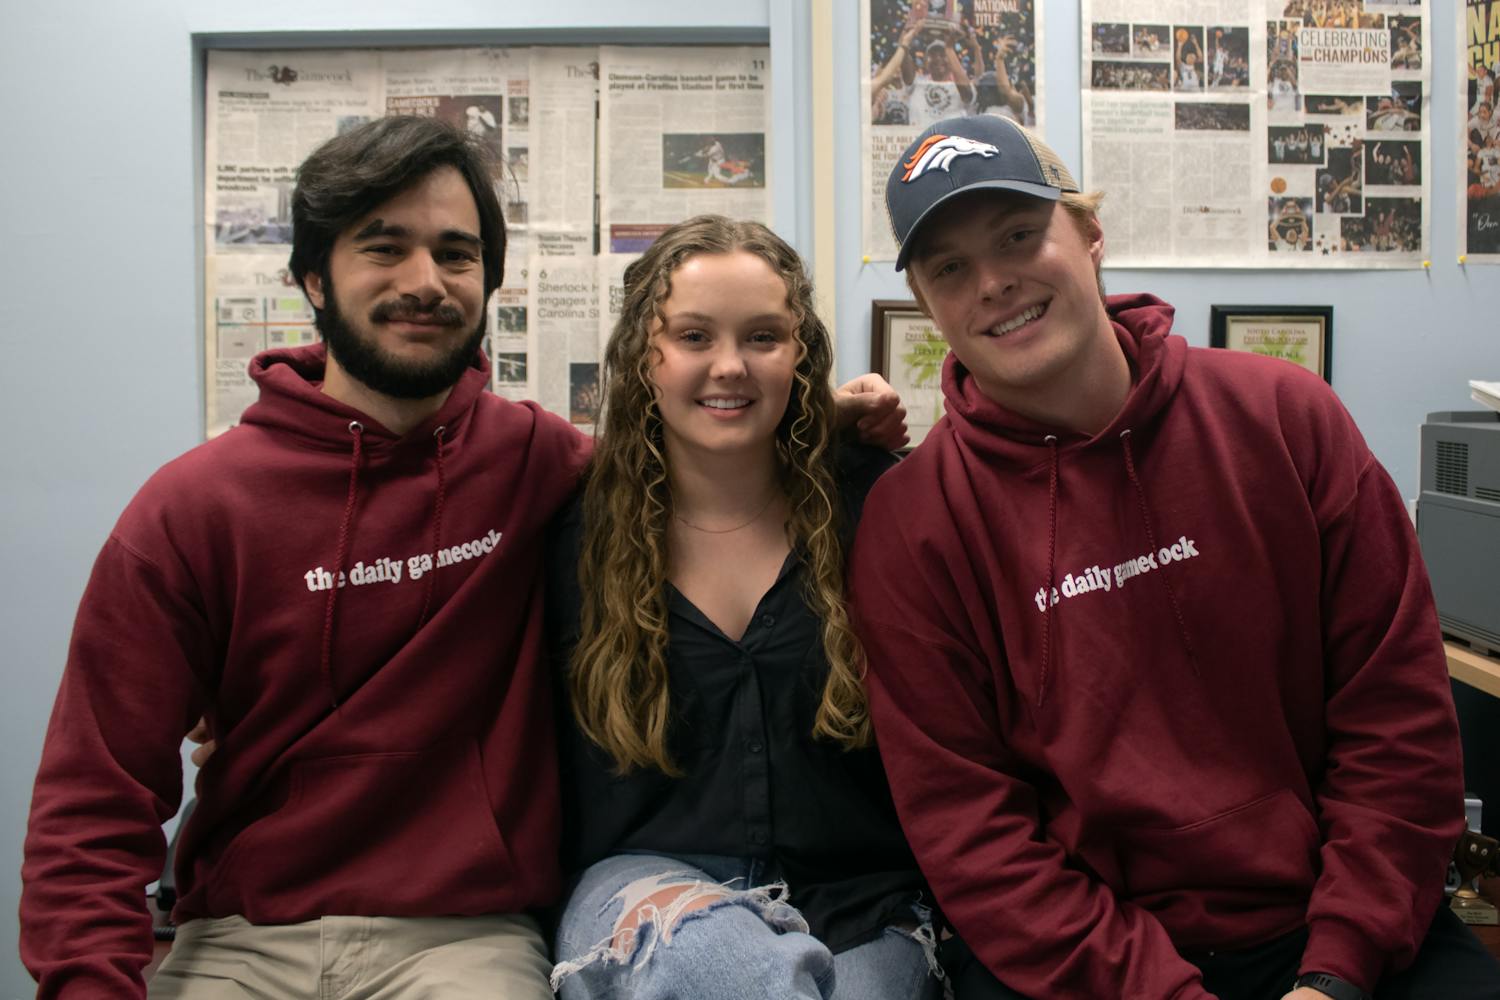 The Daily Gamecock's managing staff poses for a photo in the newsroom on Nov. 20, 2022. Editor-in-Chief Kailey Cota and managing editors Tyler Fedor (left) and Michael Sauls (right) have each worked with The Daily Gamecock for seven semesters and will step down on Dec. 12, 2022.